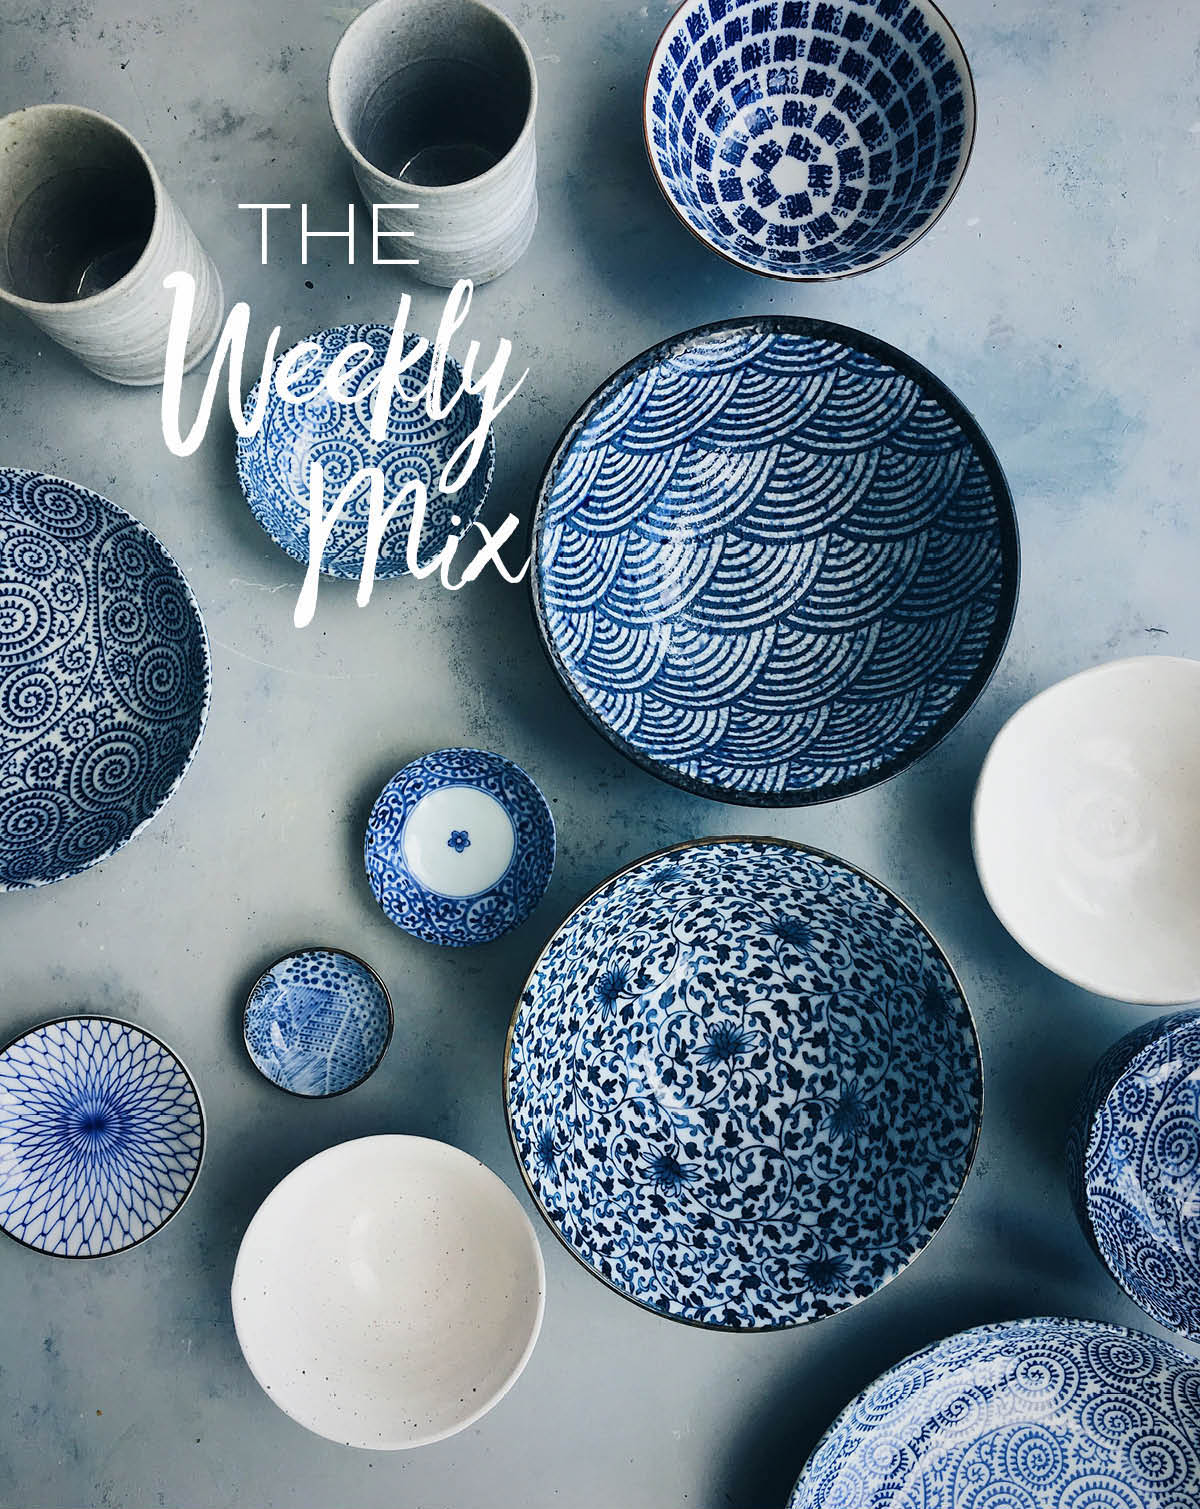 The Weekly Mix - A Beautiful Plate